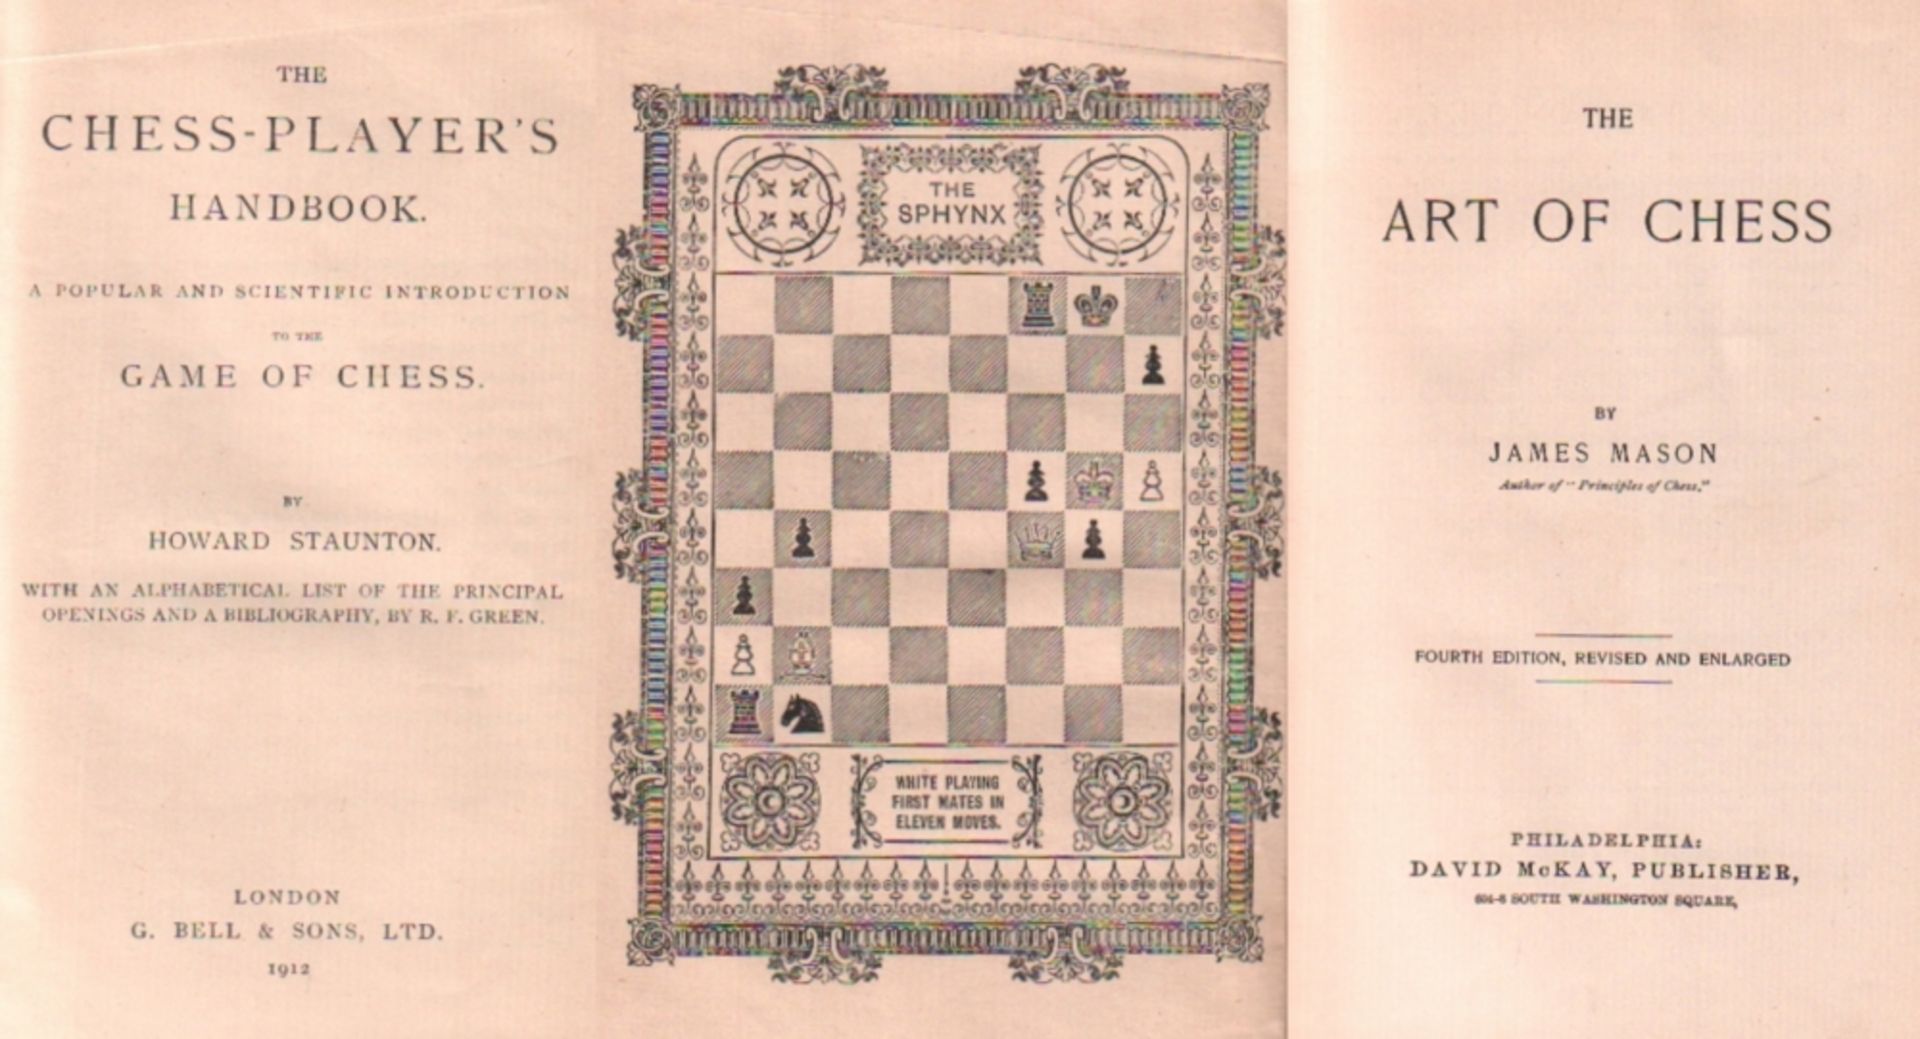 Staunton, Howard. The chess - player's handbook. A popular and scientific introduction to the game